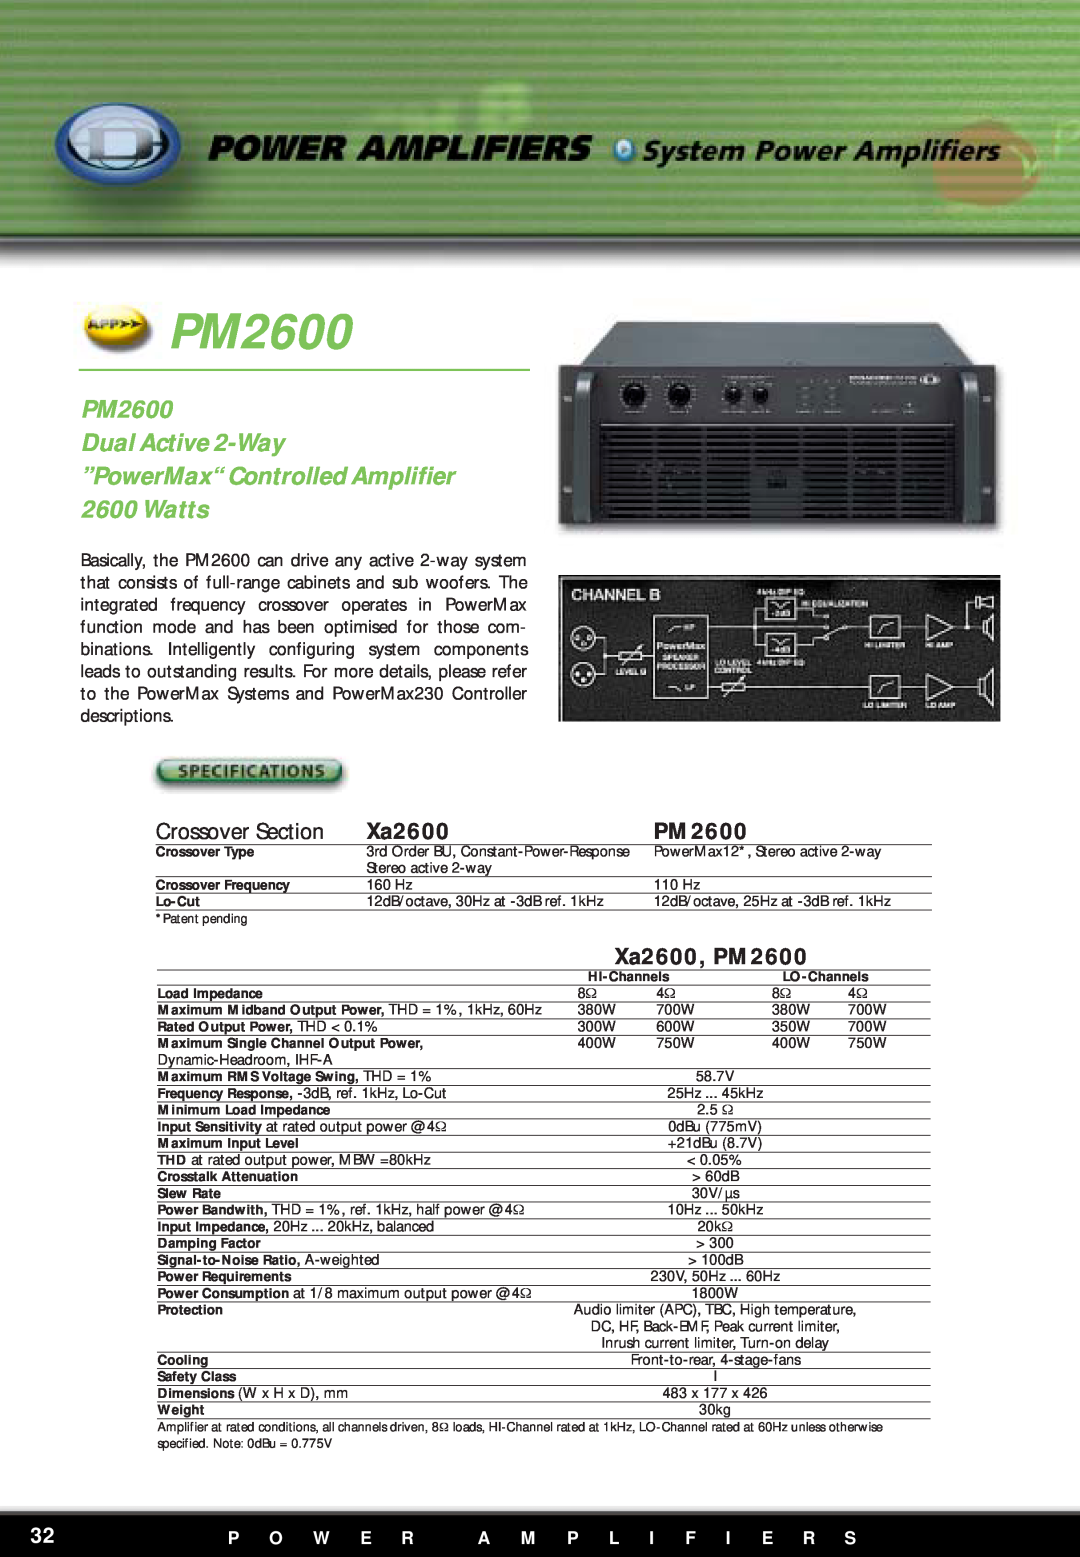 Dynacord Xa2600 PM2600 Dual Active 2-Way, ”PowerMax“ Controlled Amplifier 2600 Watts, Crossover Section, P O W E R 